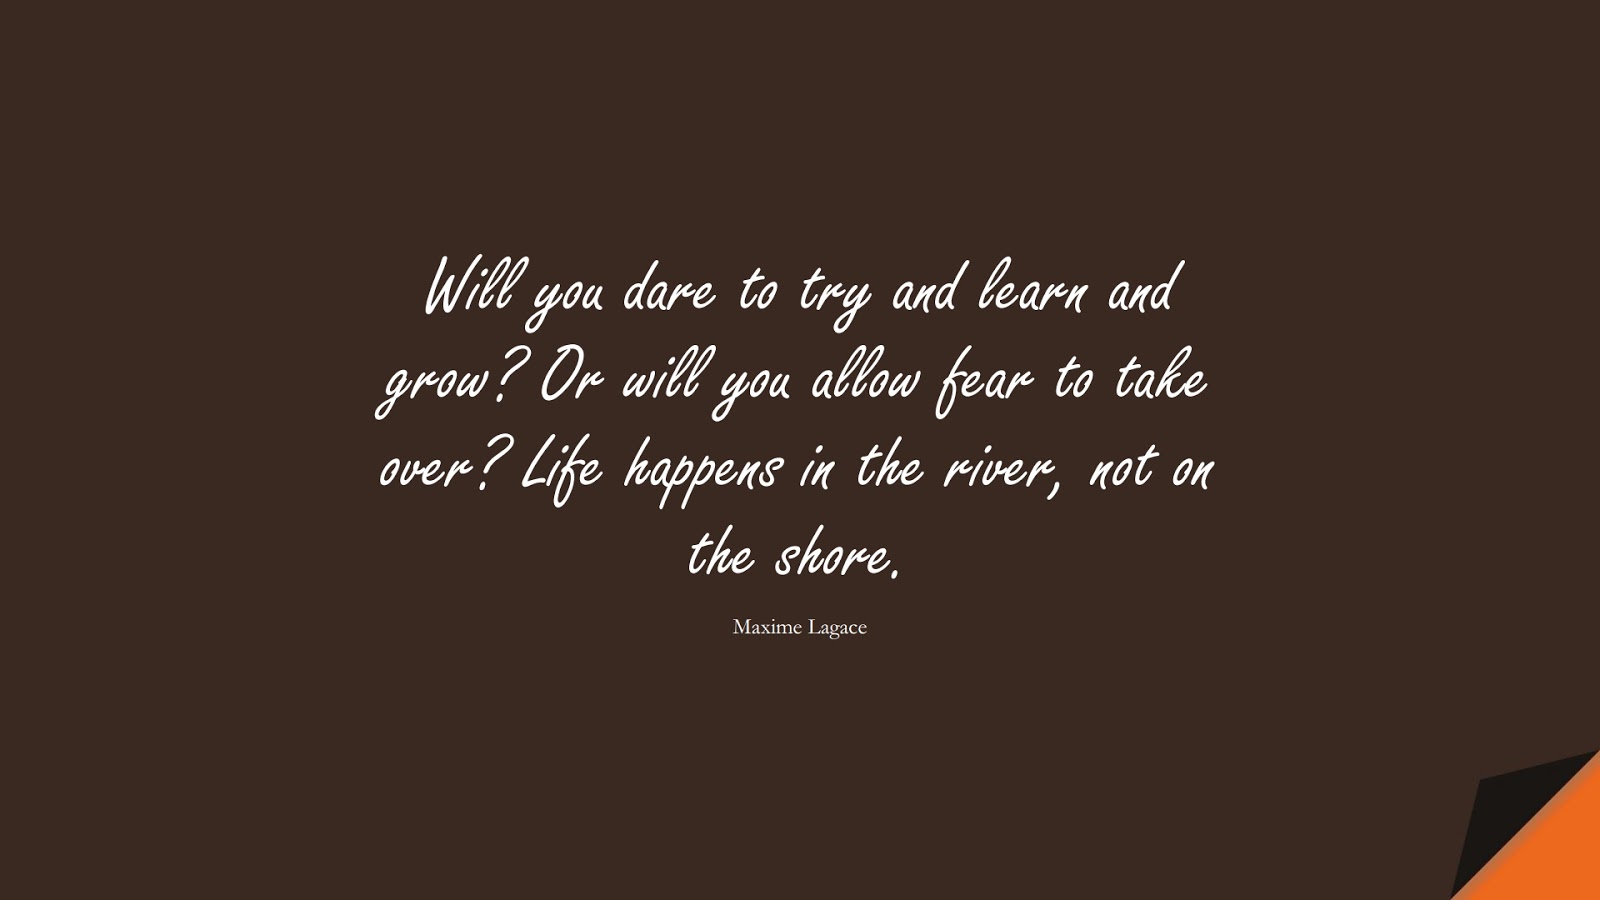 Will you dare to try and learn and grow? Or will you allow fear to take over? Life happens in the river, not on the shore. (Maxime Lagace);  #CourageQuotes